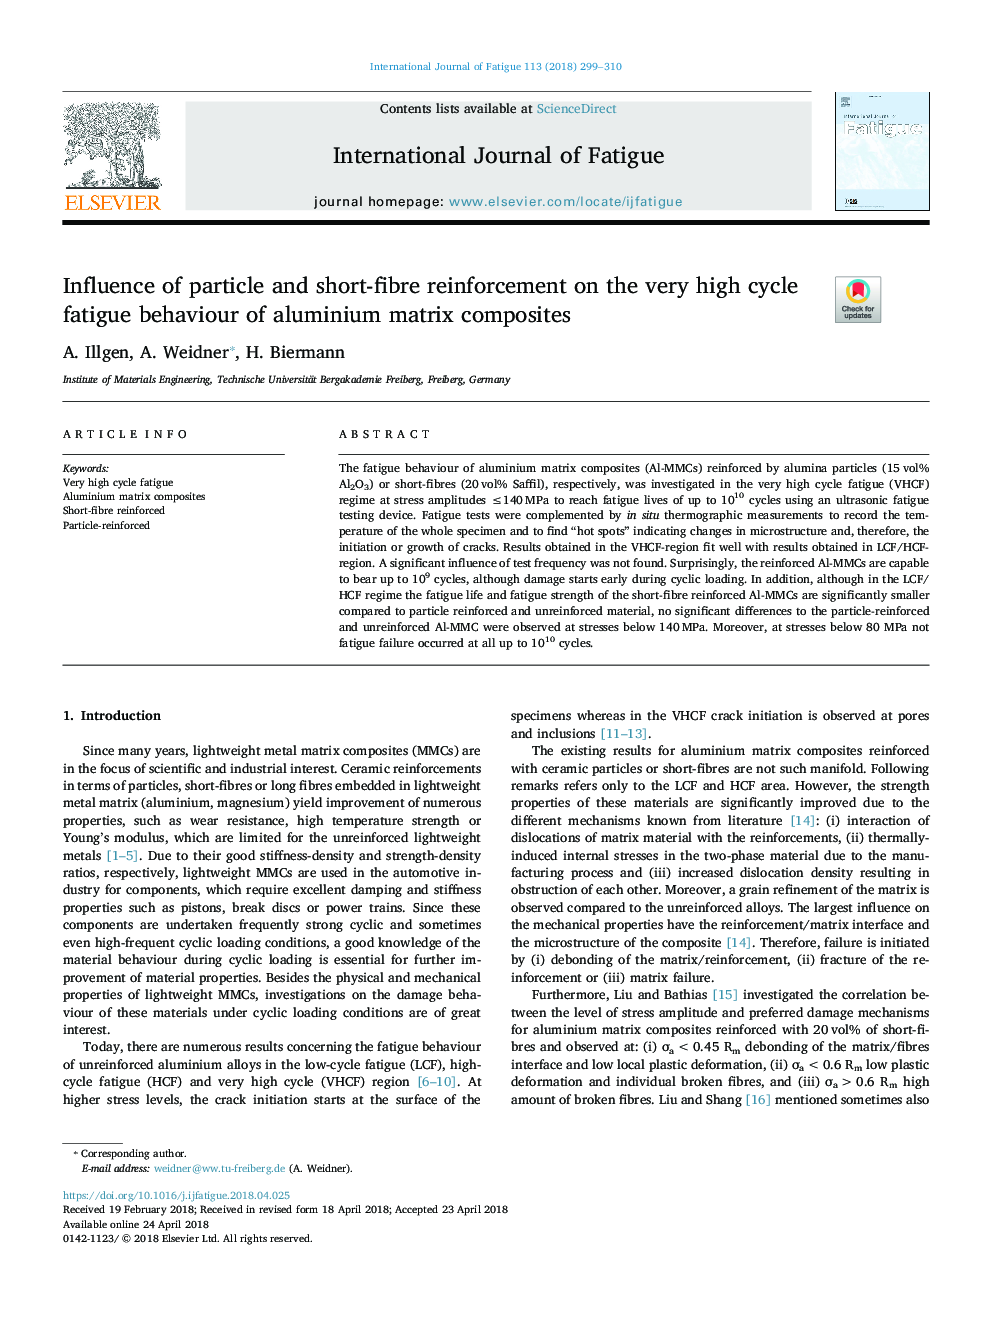 Influence of particle and short-fibre reinforcement on the very high cycle fatigue behaviour of aluminium matrix composites